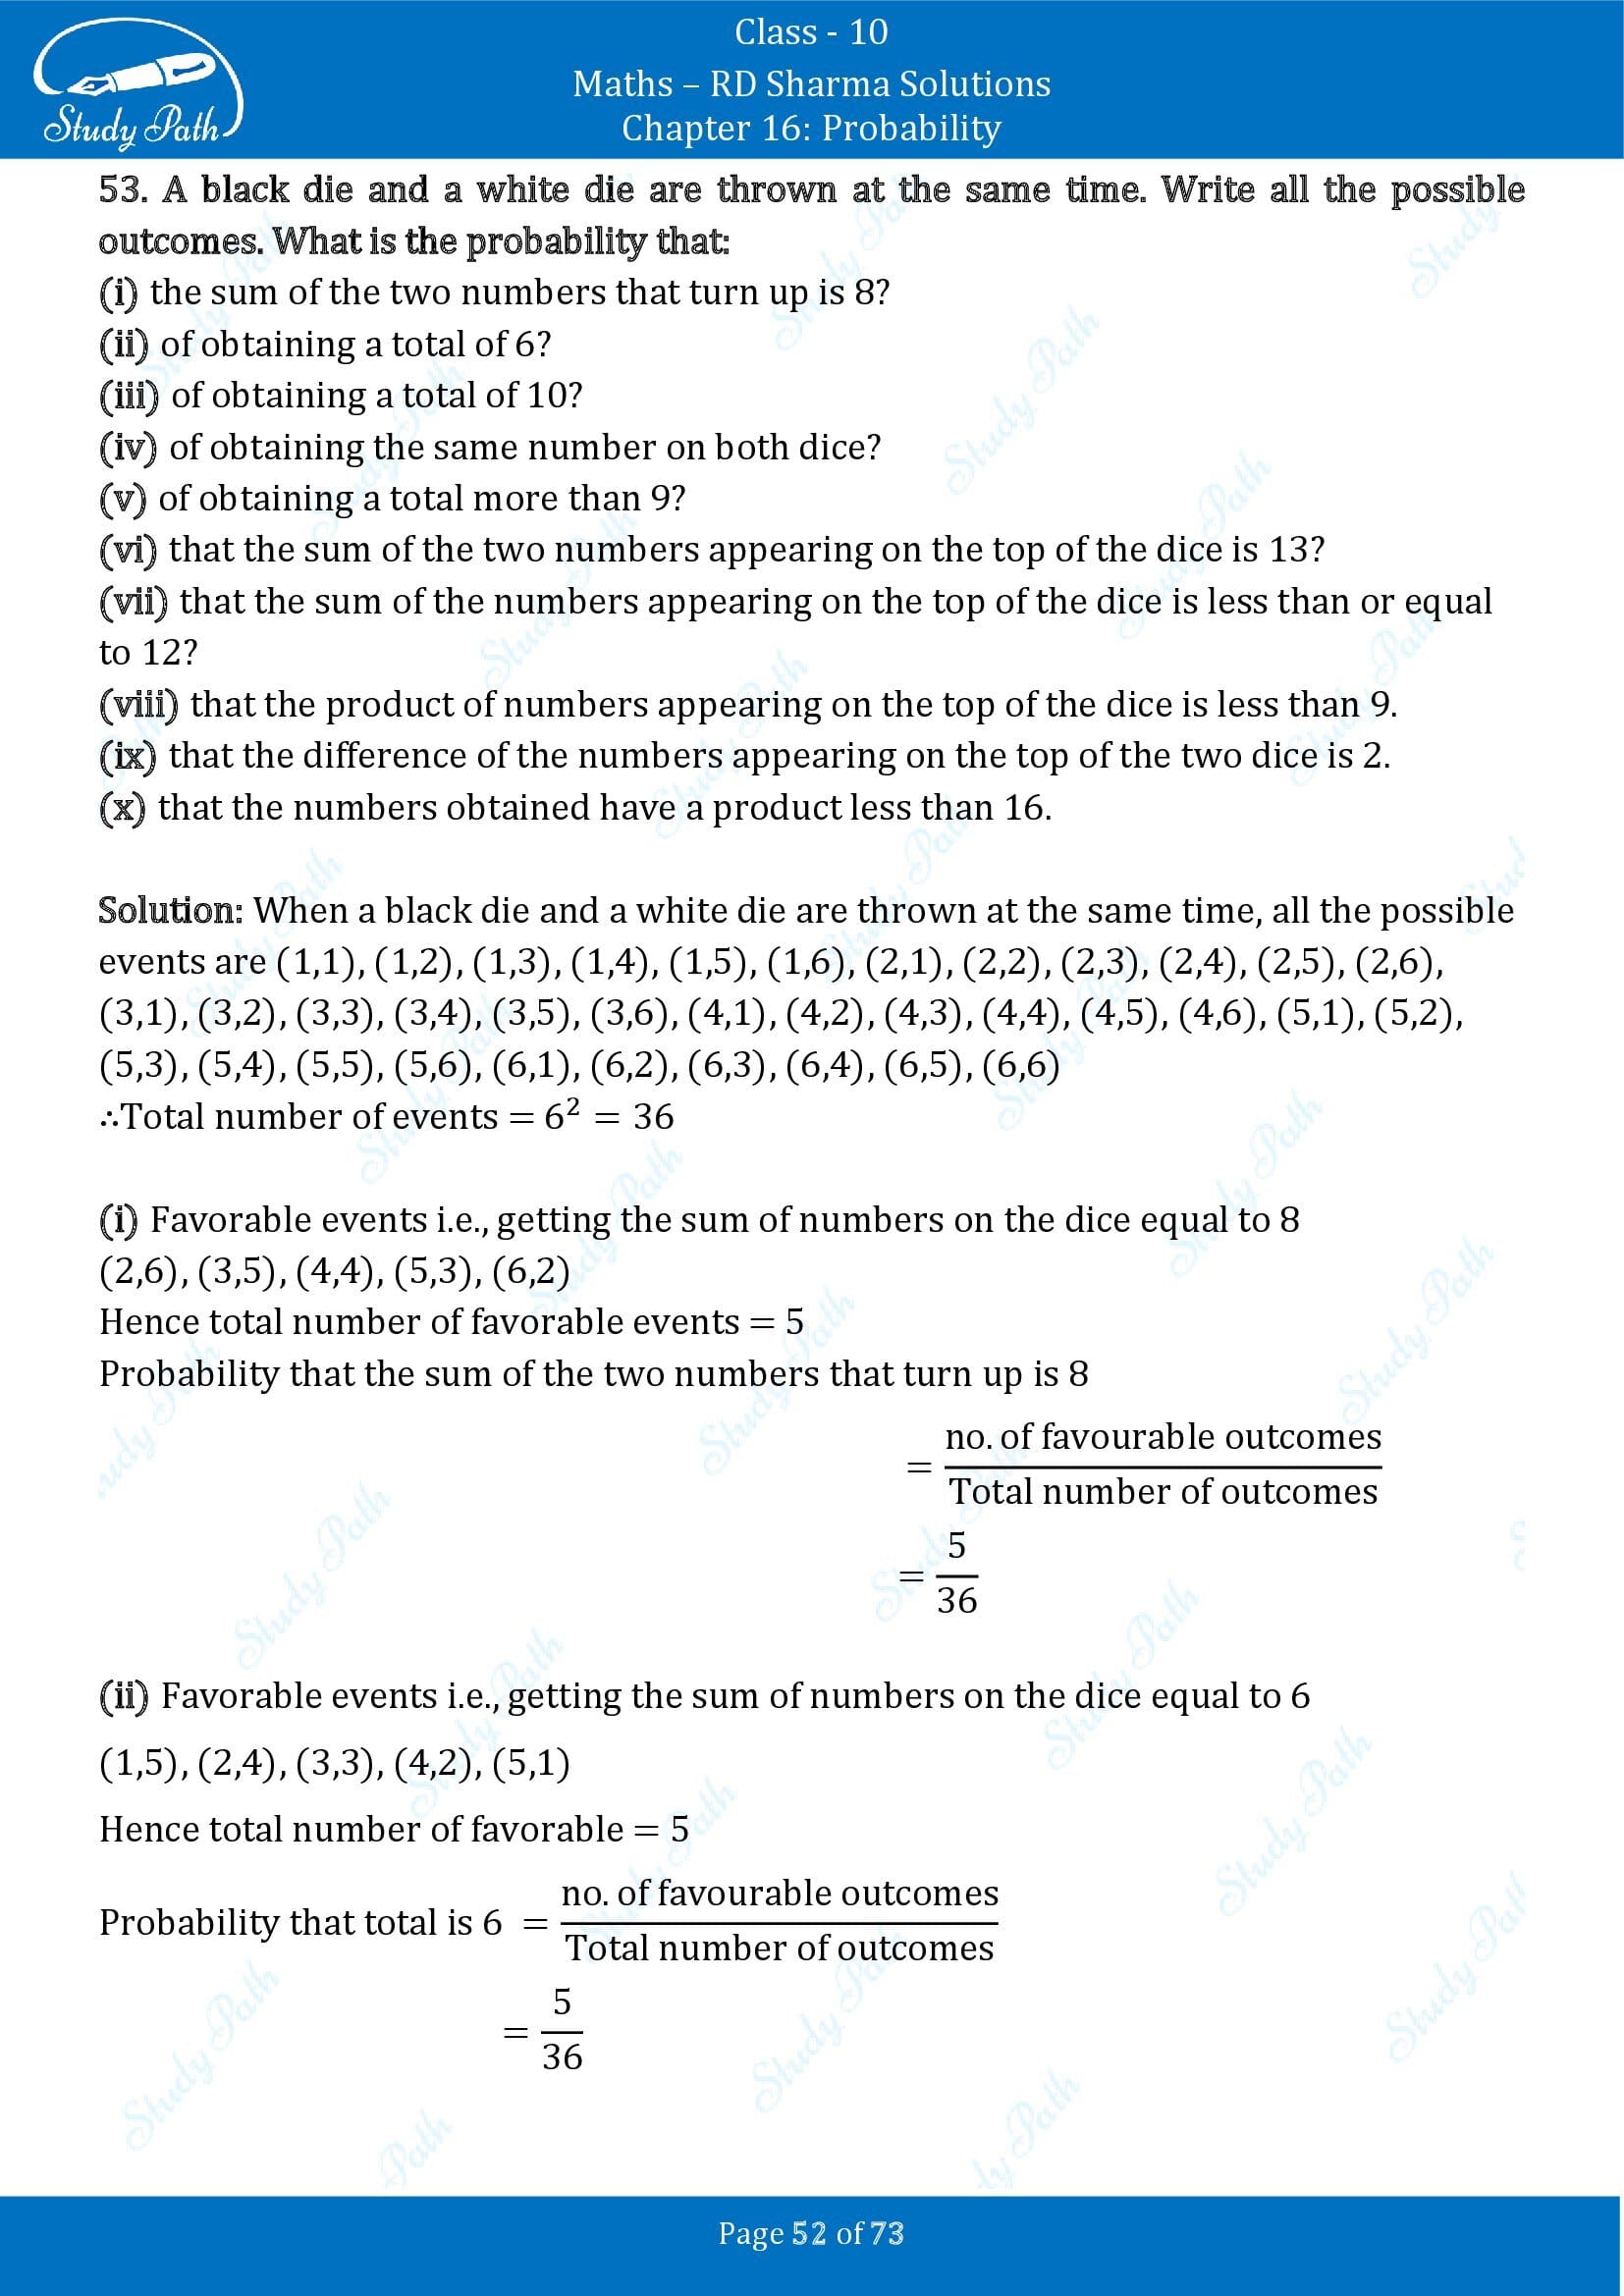 RD Sharma Solutions Class 10 Chapter 16 Probability Exercise 16.1 00052